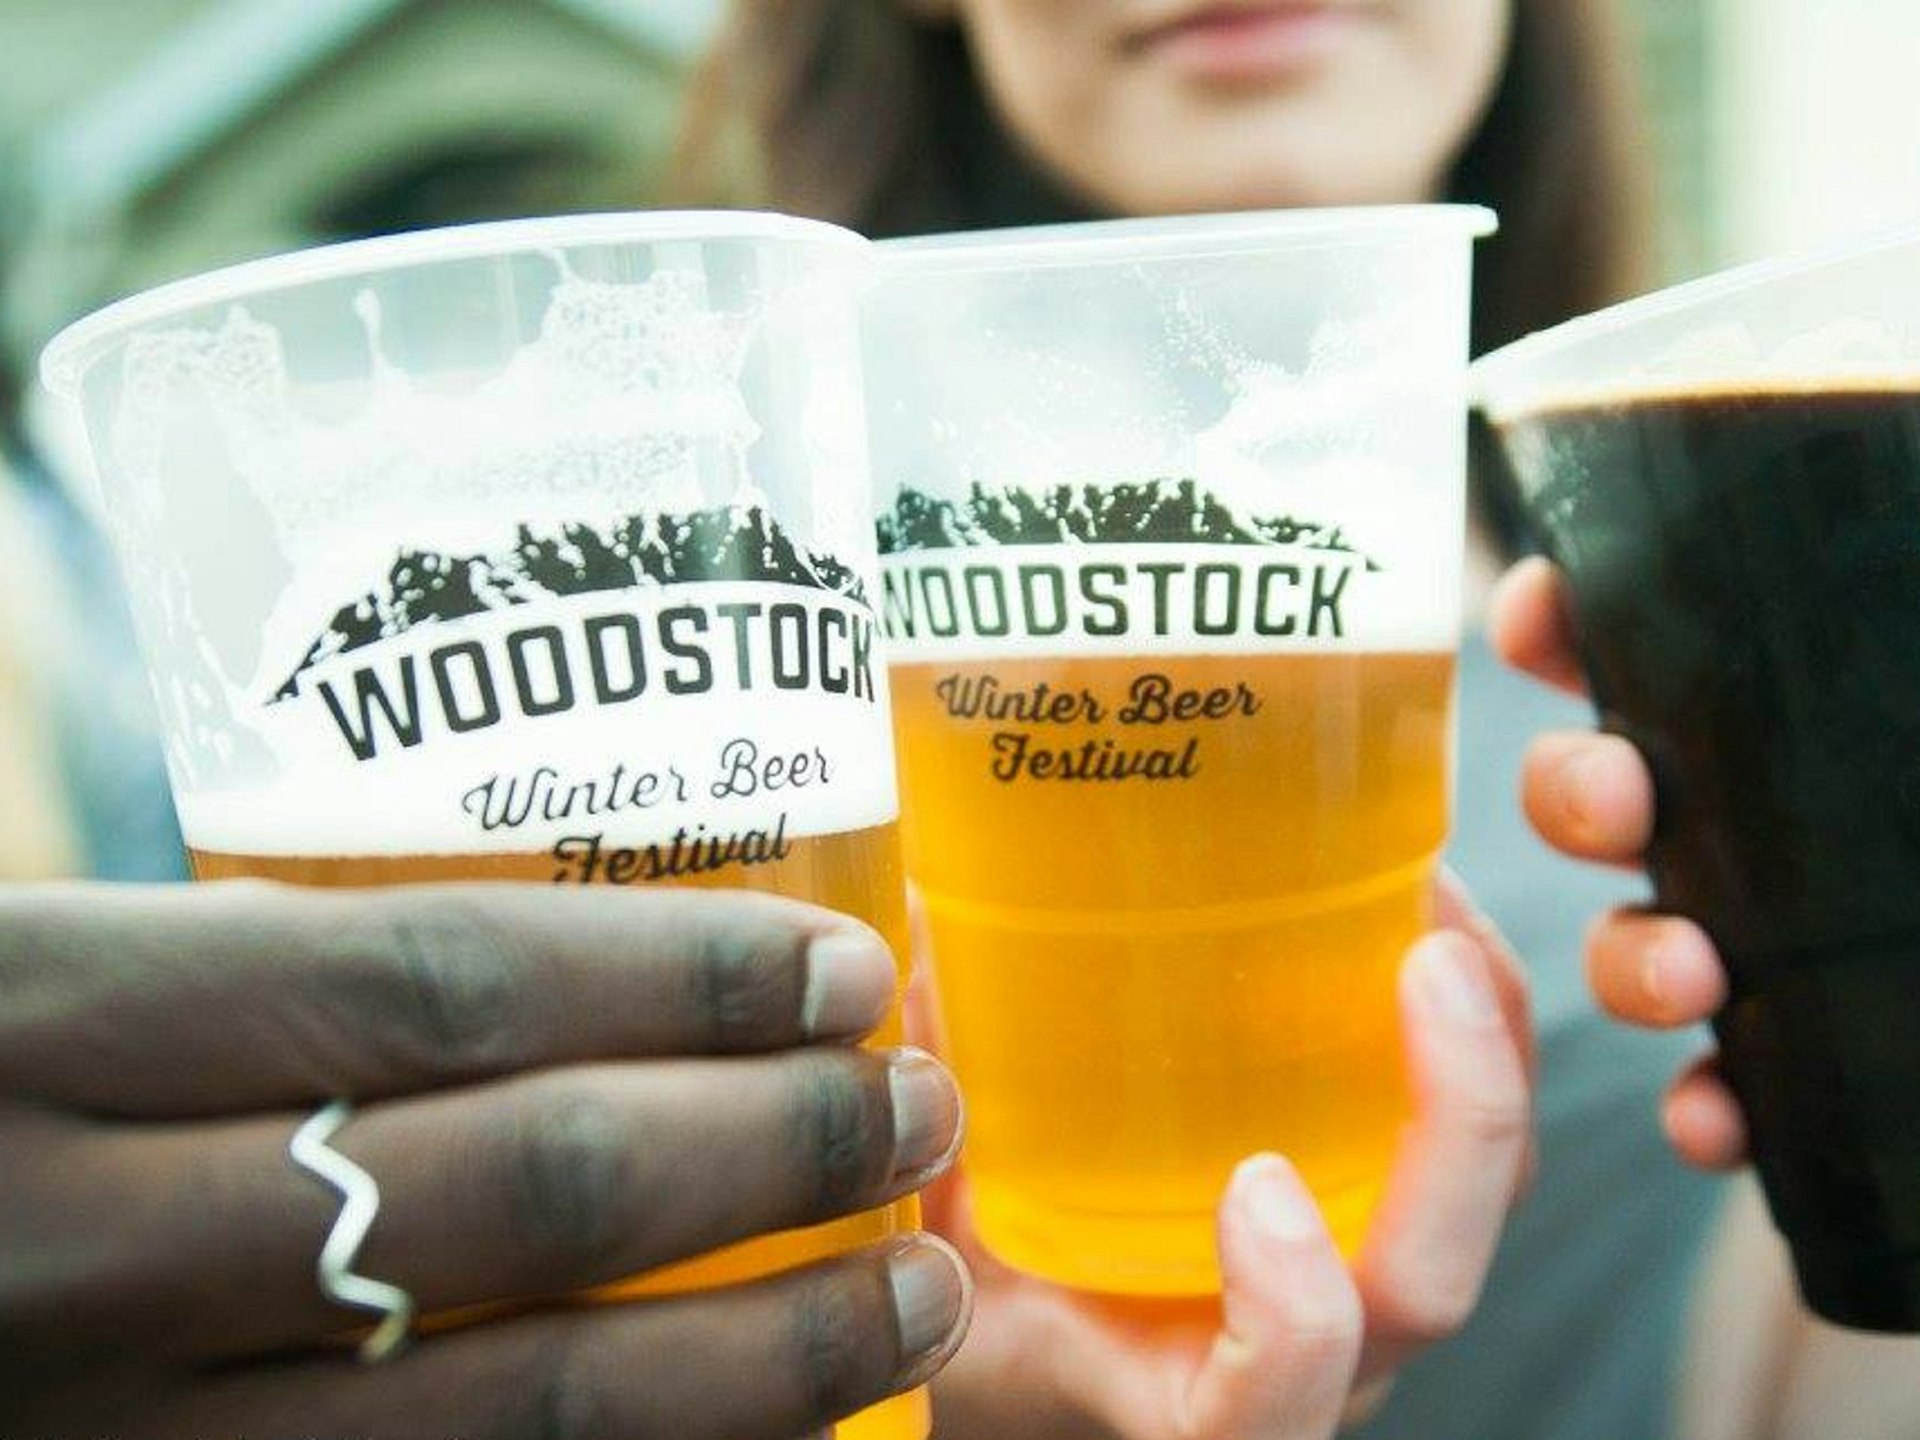 Alternative festivals - three people holding up plastic cups of beer with the Woodstock Winter Beer Festival logo on them